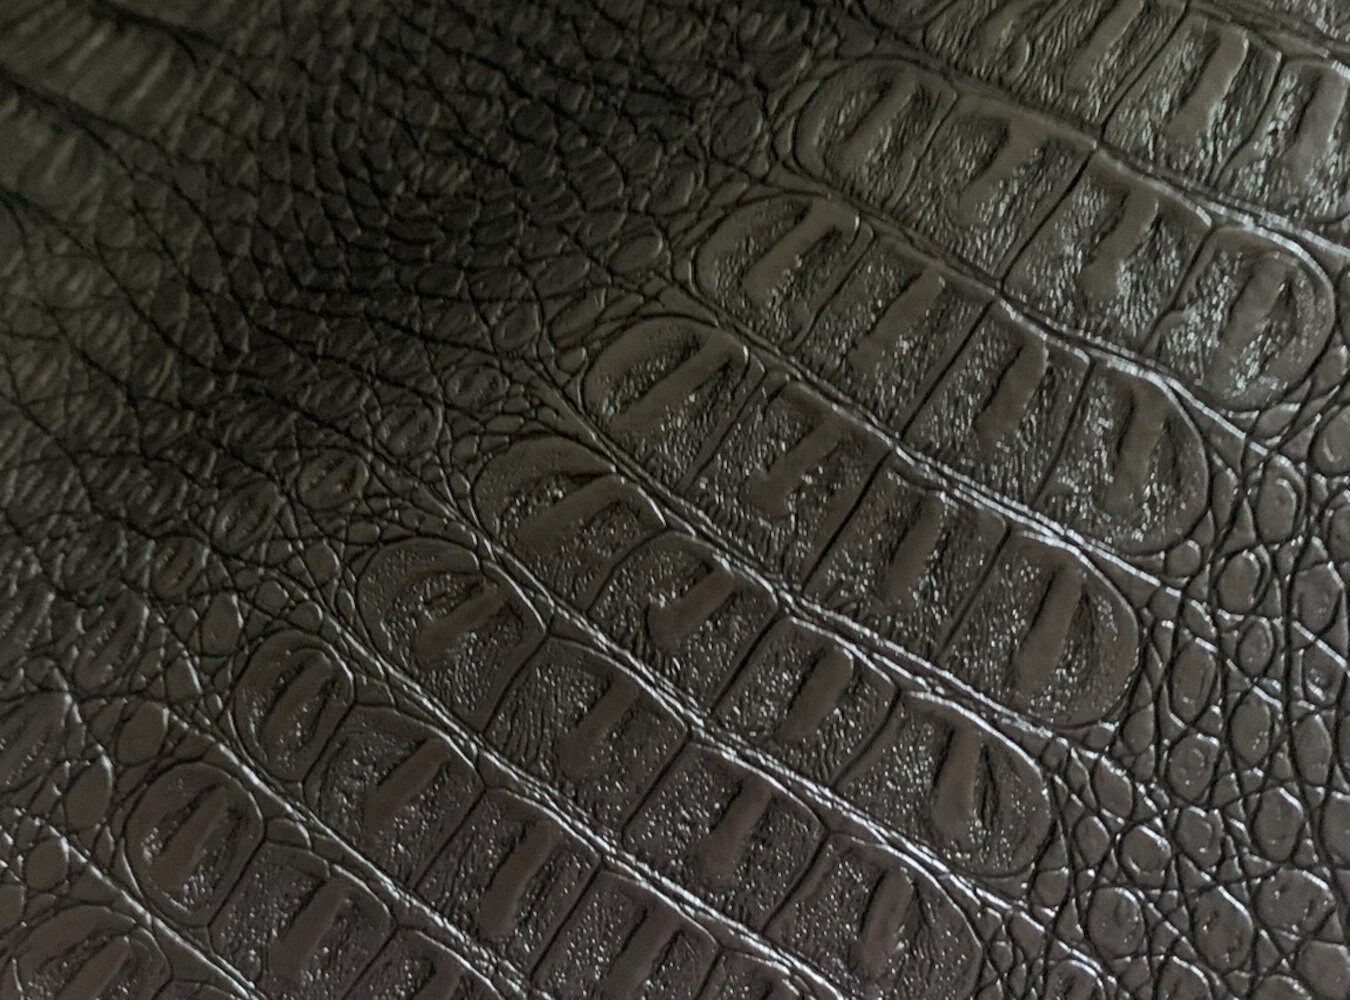 Gator Faux Leather Fabric by the Yard 54 Wide many Color Choices 